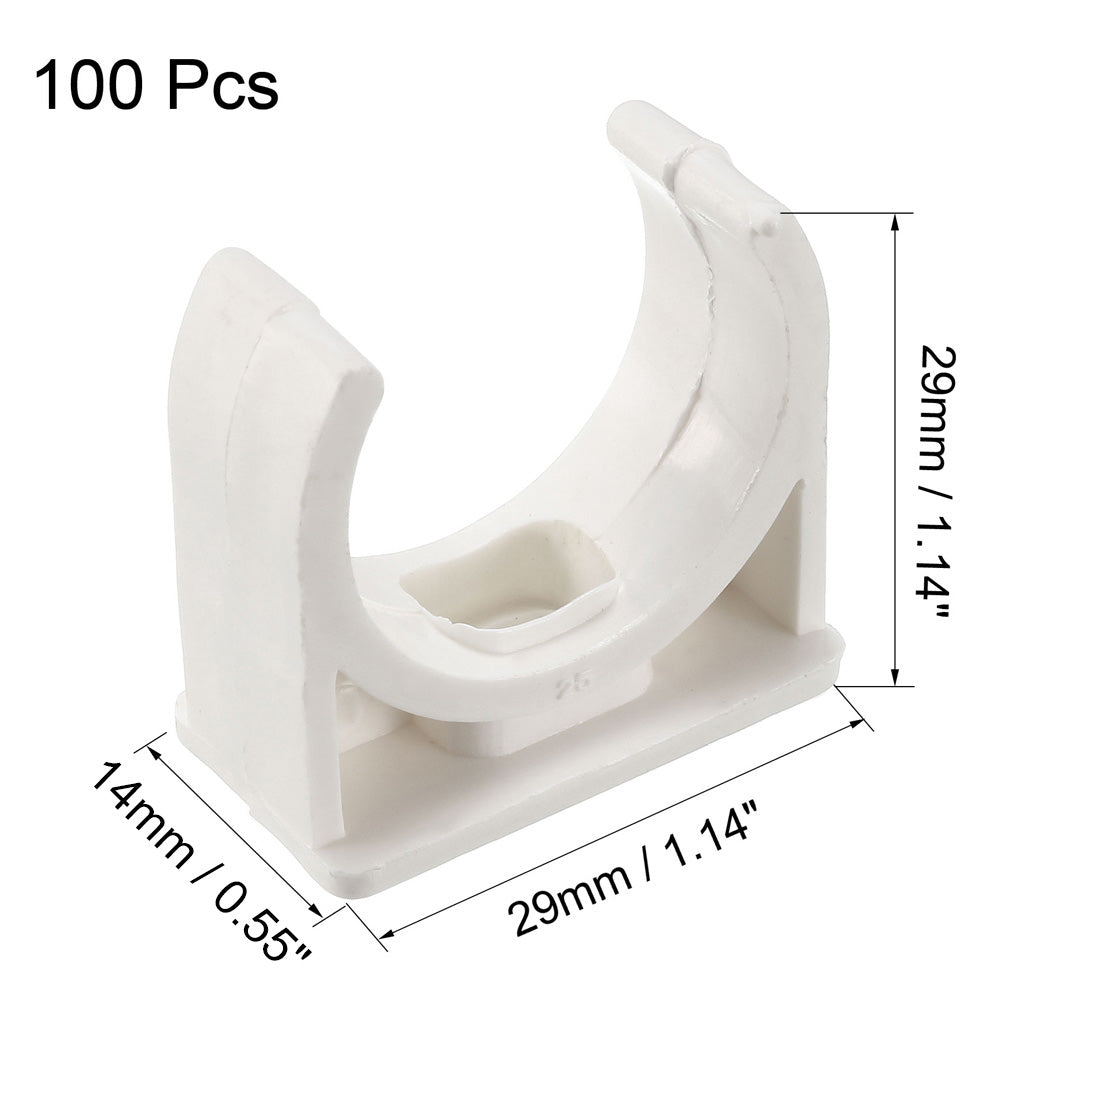 uxcell Uxcell PVC Water Pipe 25mm Clamps Clips, Fit for 25mm/1 Inch OD TV Trays Tubing Hose Hanger Support Pex Tubing, 100Pcs